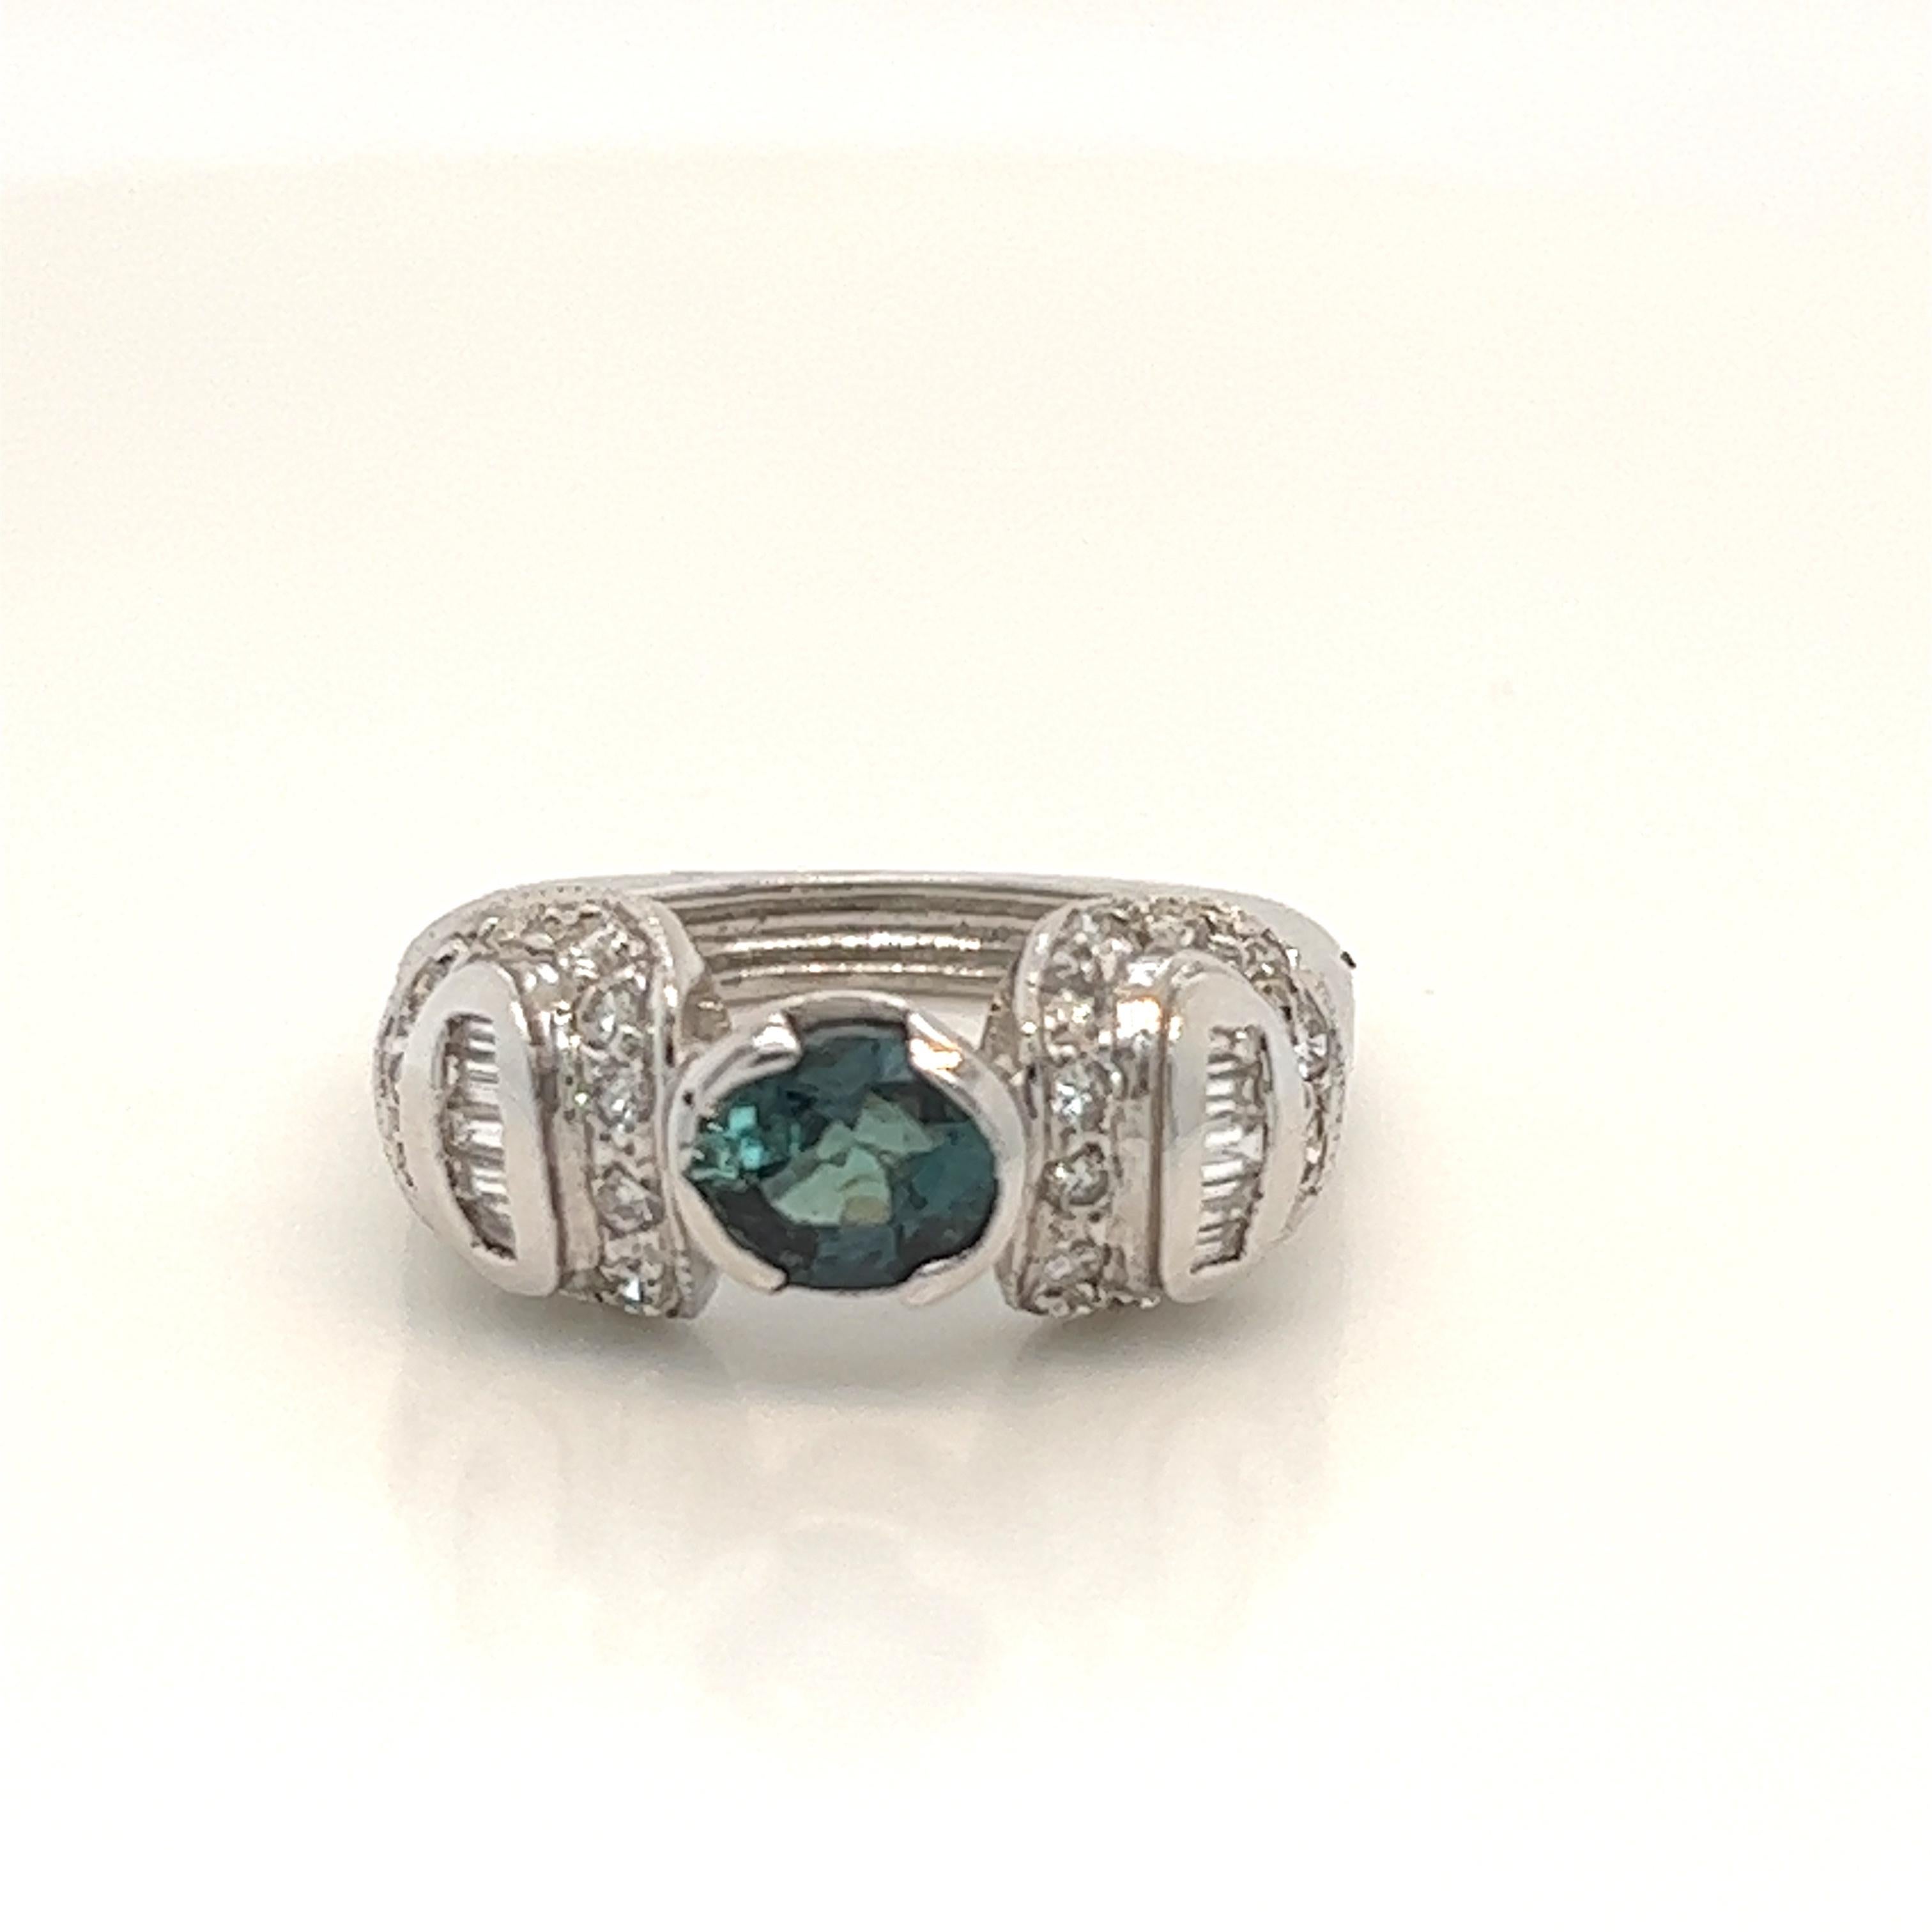 This is a gorgeous natural AAA quality Oval Alexandrite with Baguette diamonds that is set in solid 18K white gold. This ring features a natural 1.29 carat oval alexandrite that is certified by the Gemological Institute of America (GIA). The ring is